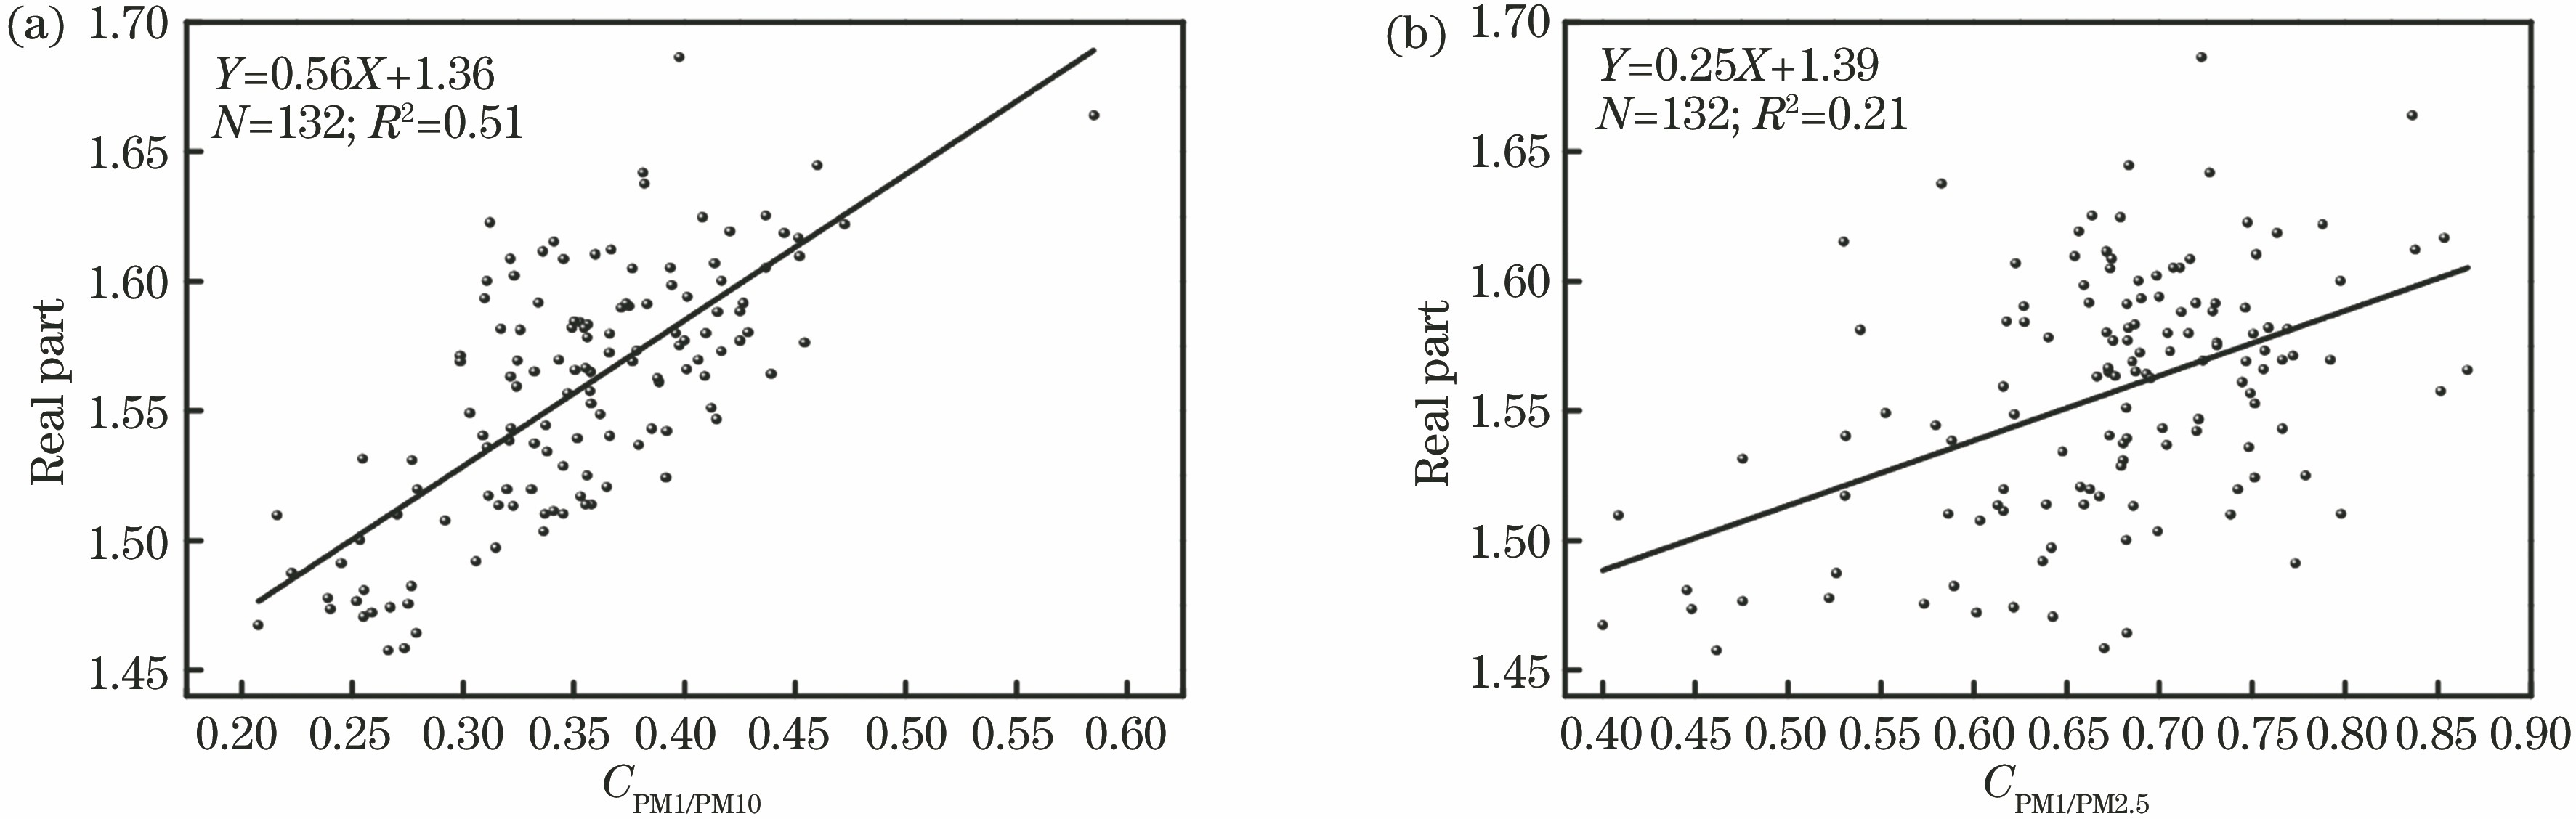 Scatter plots for real part (nre) of equivalent complex refractive index of “dry” aerosol versus mass concentration indexes of particles. (a) Scatter plot for CPM1/PM10; (b) scatter plot for CPM1/PM2.5